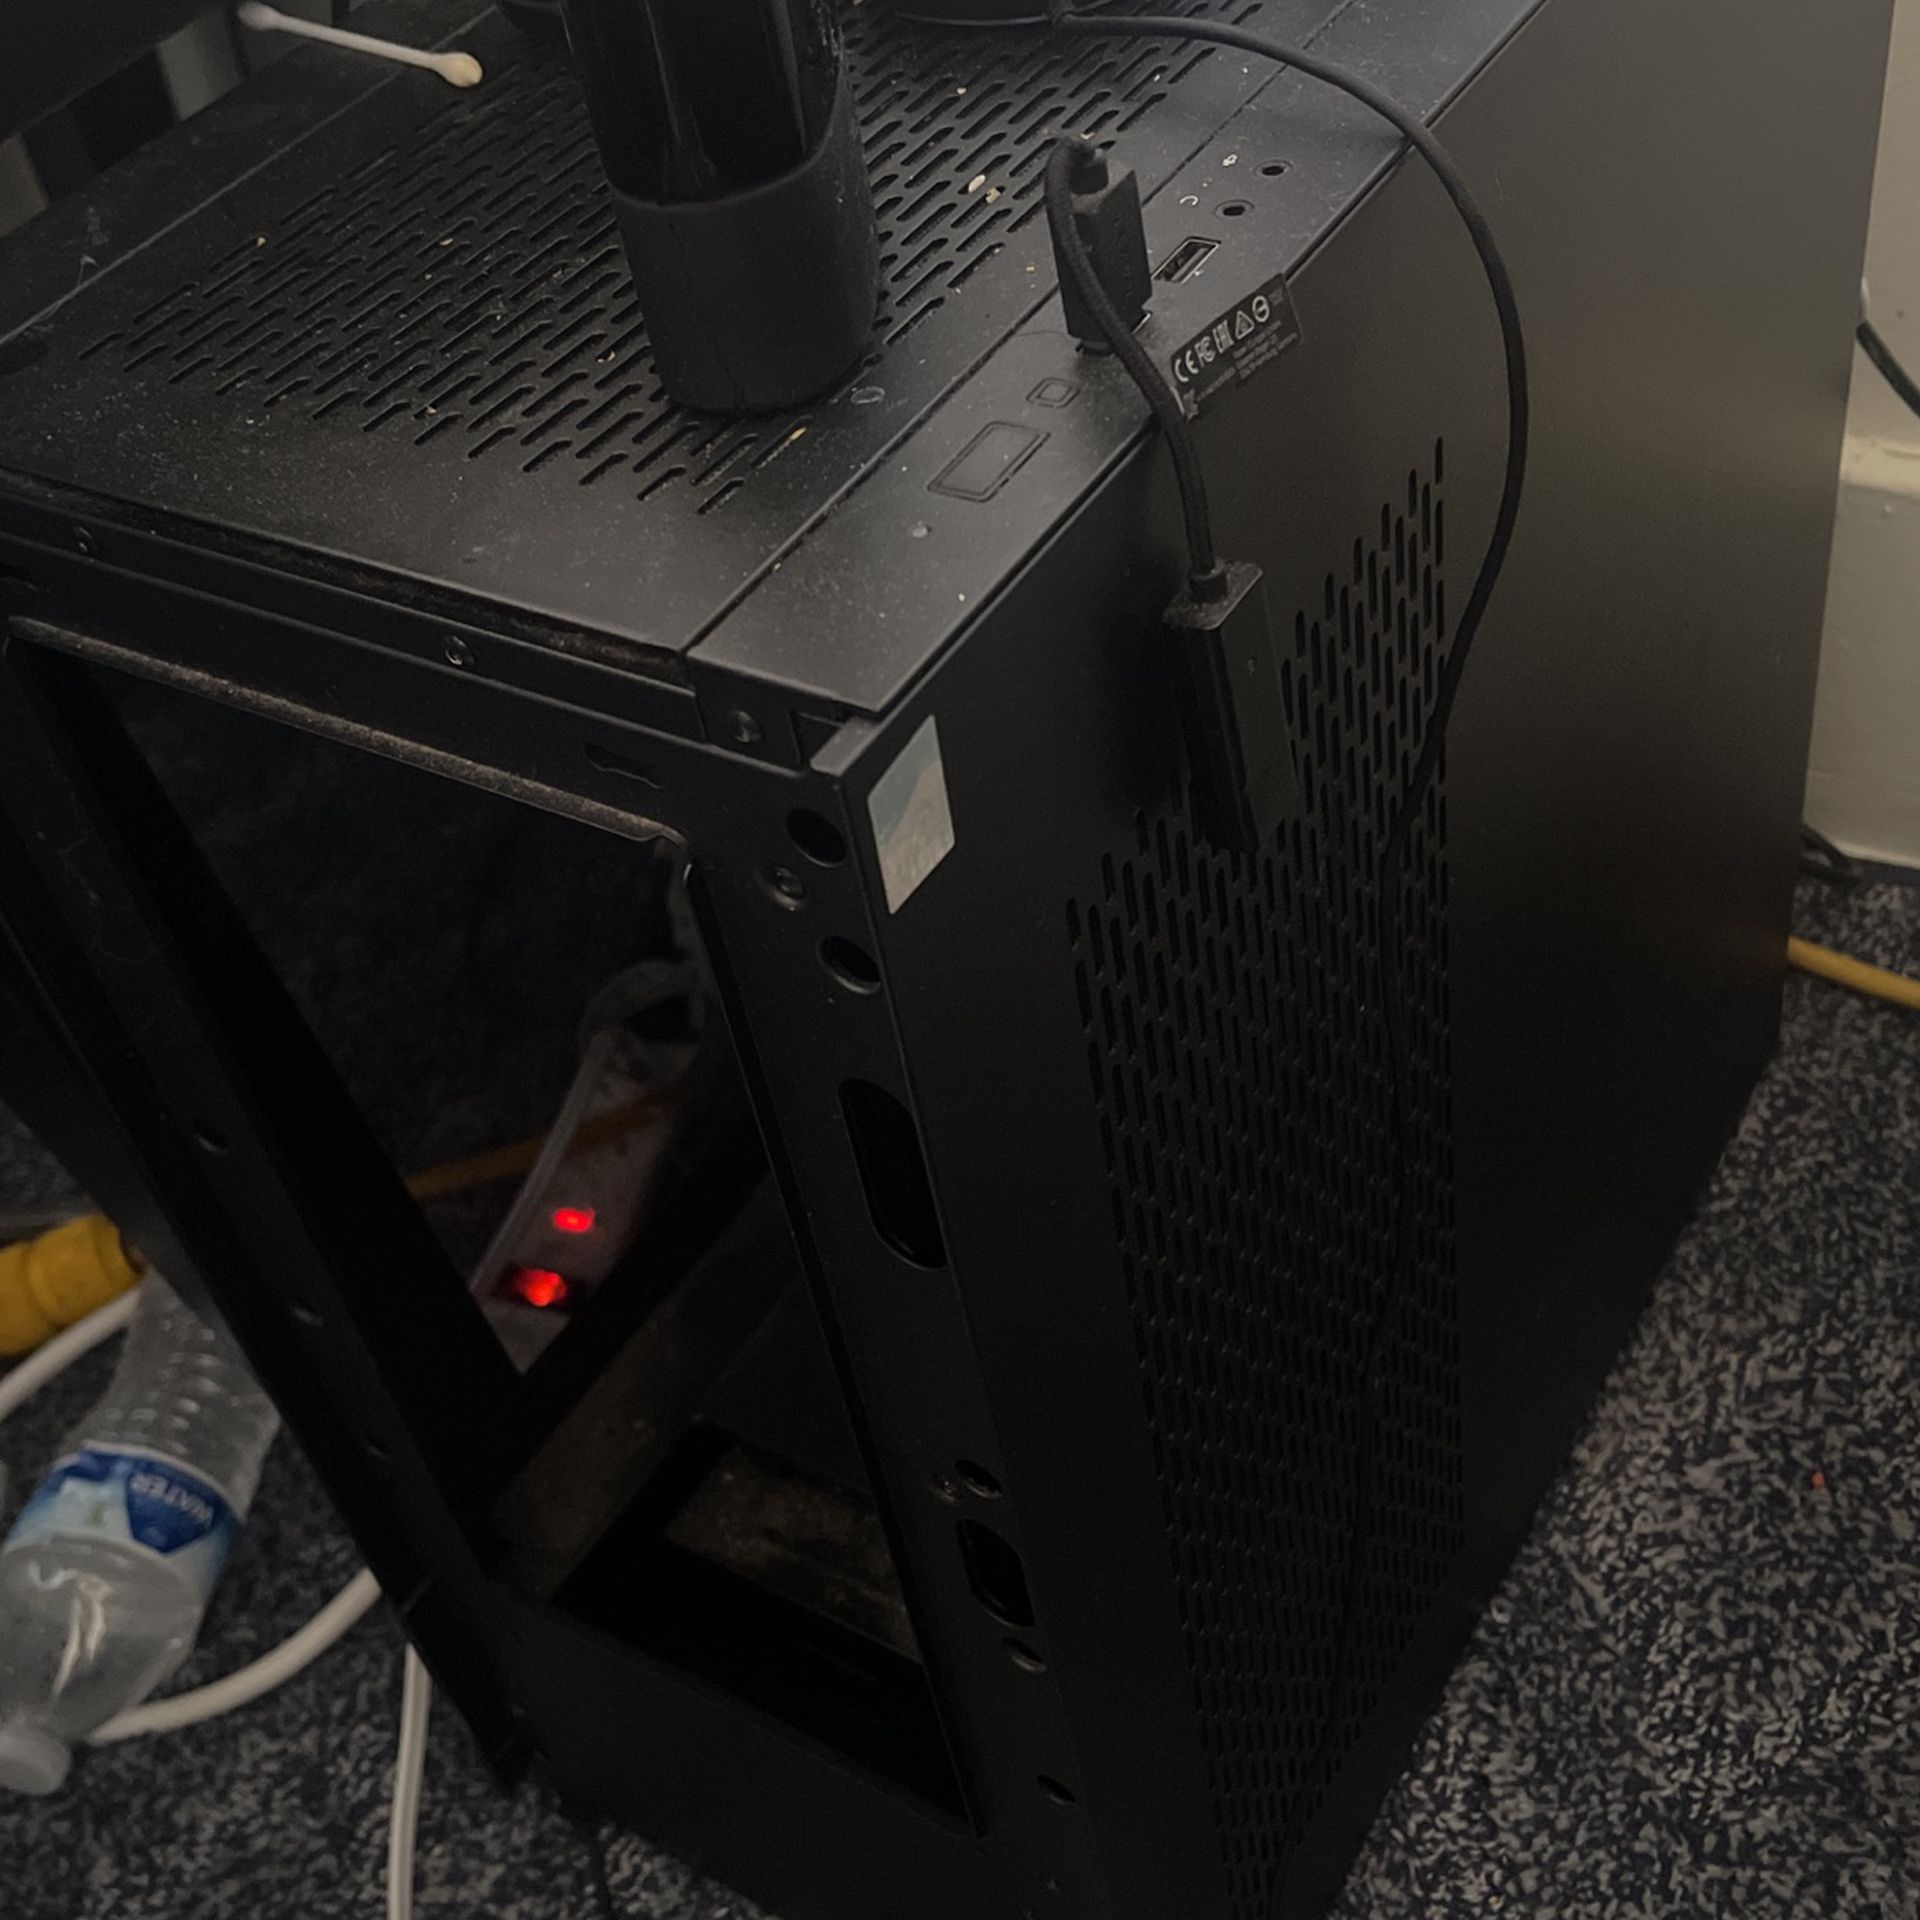 Gaming PC FOR SALE 